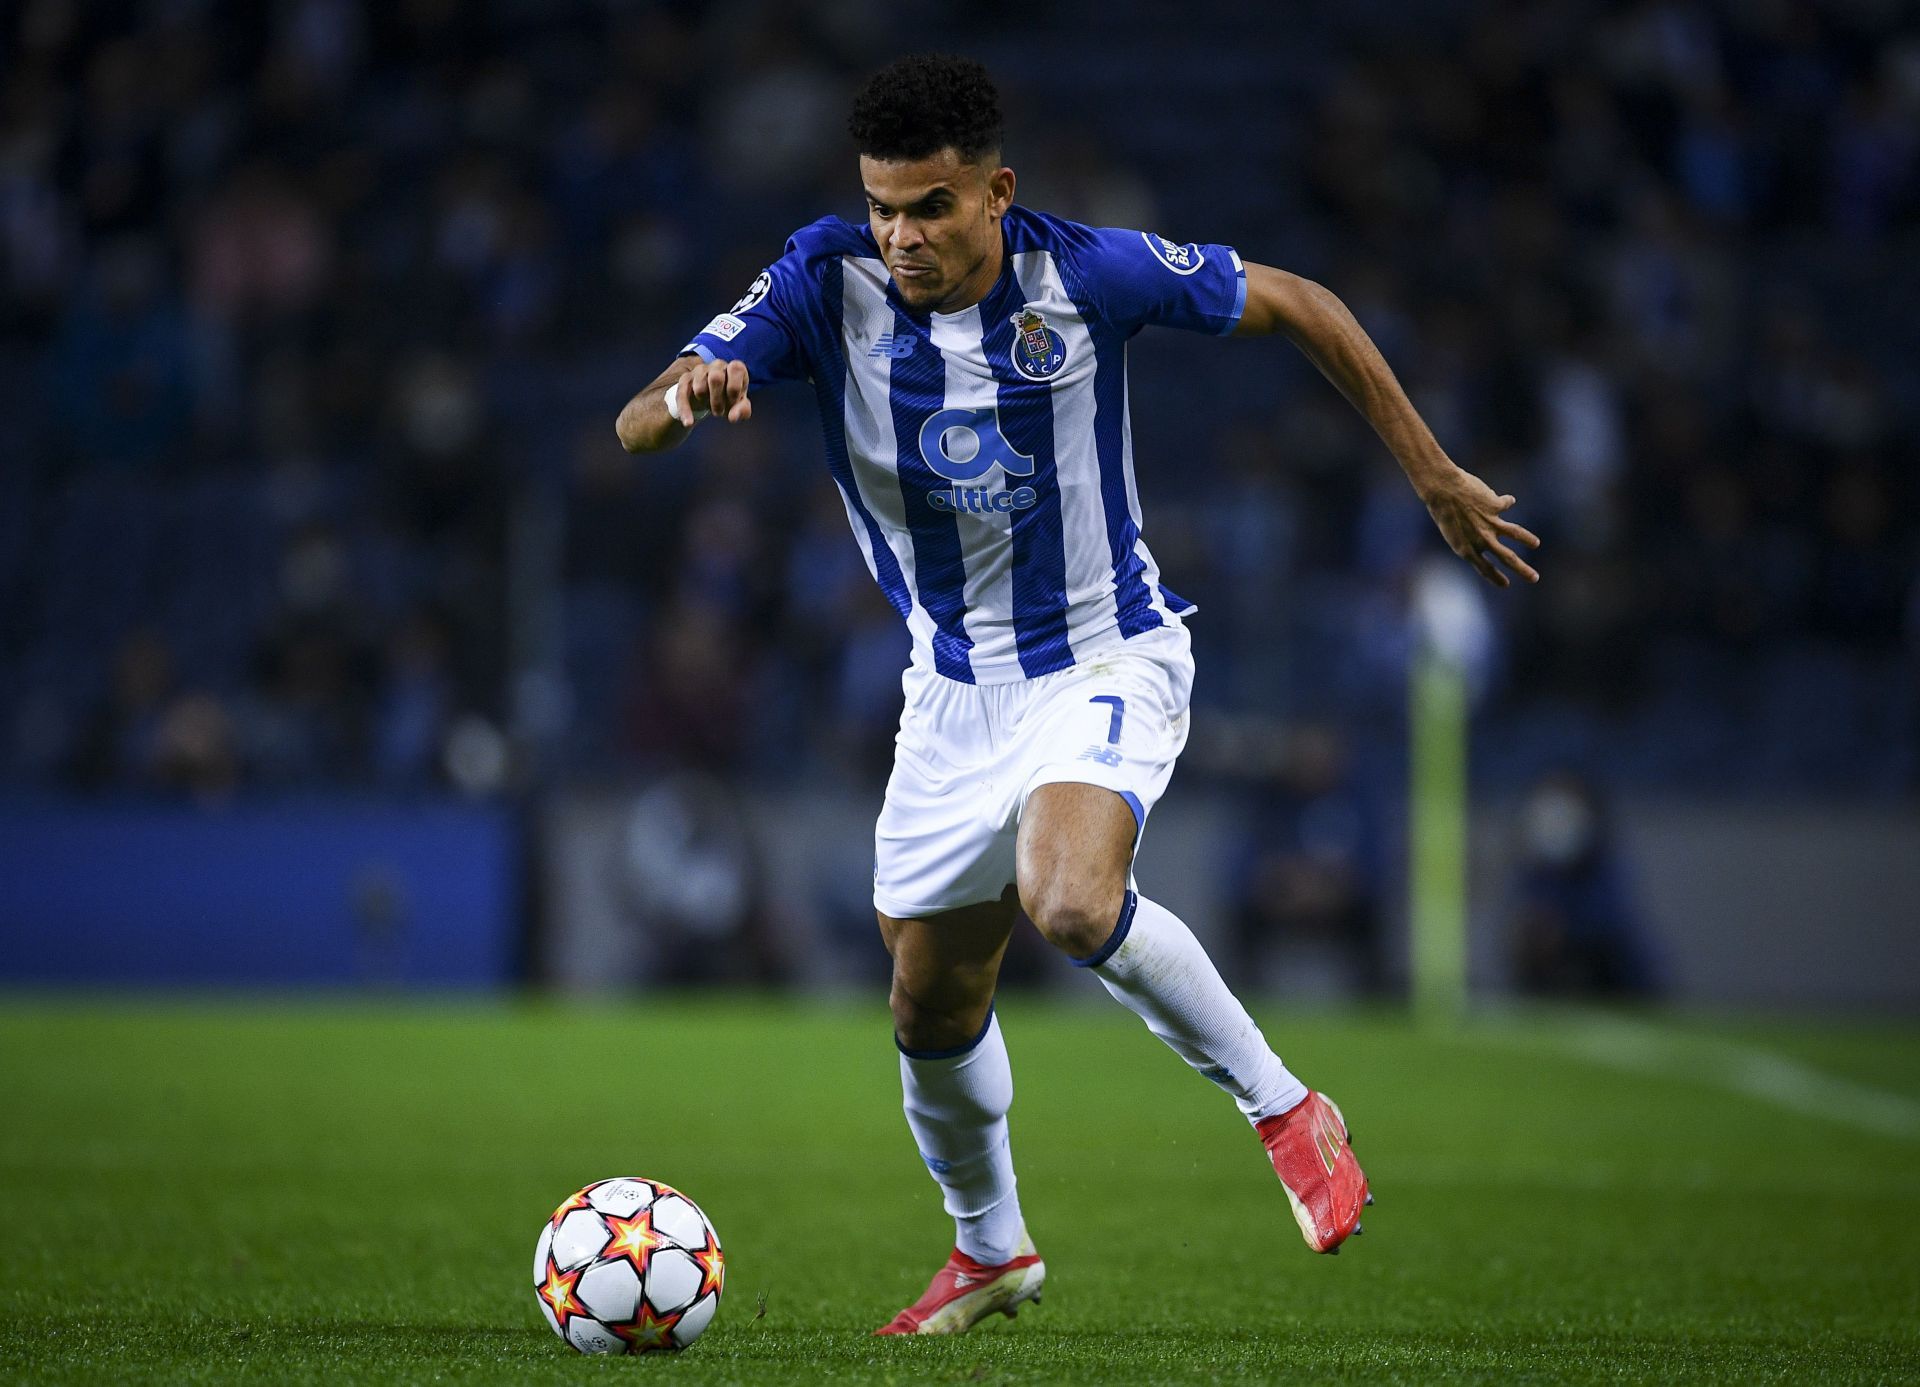 Luis Diaz in action for FC Porto